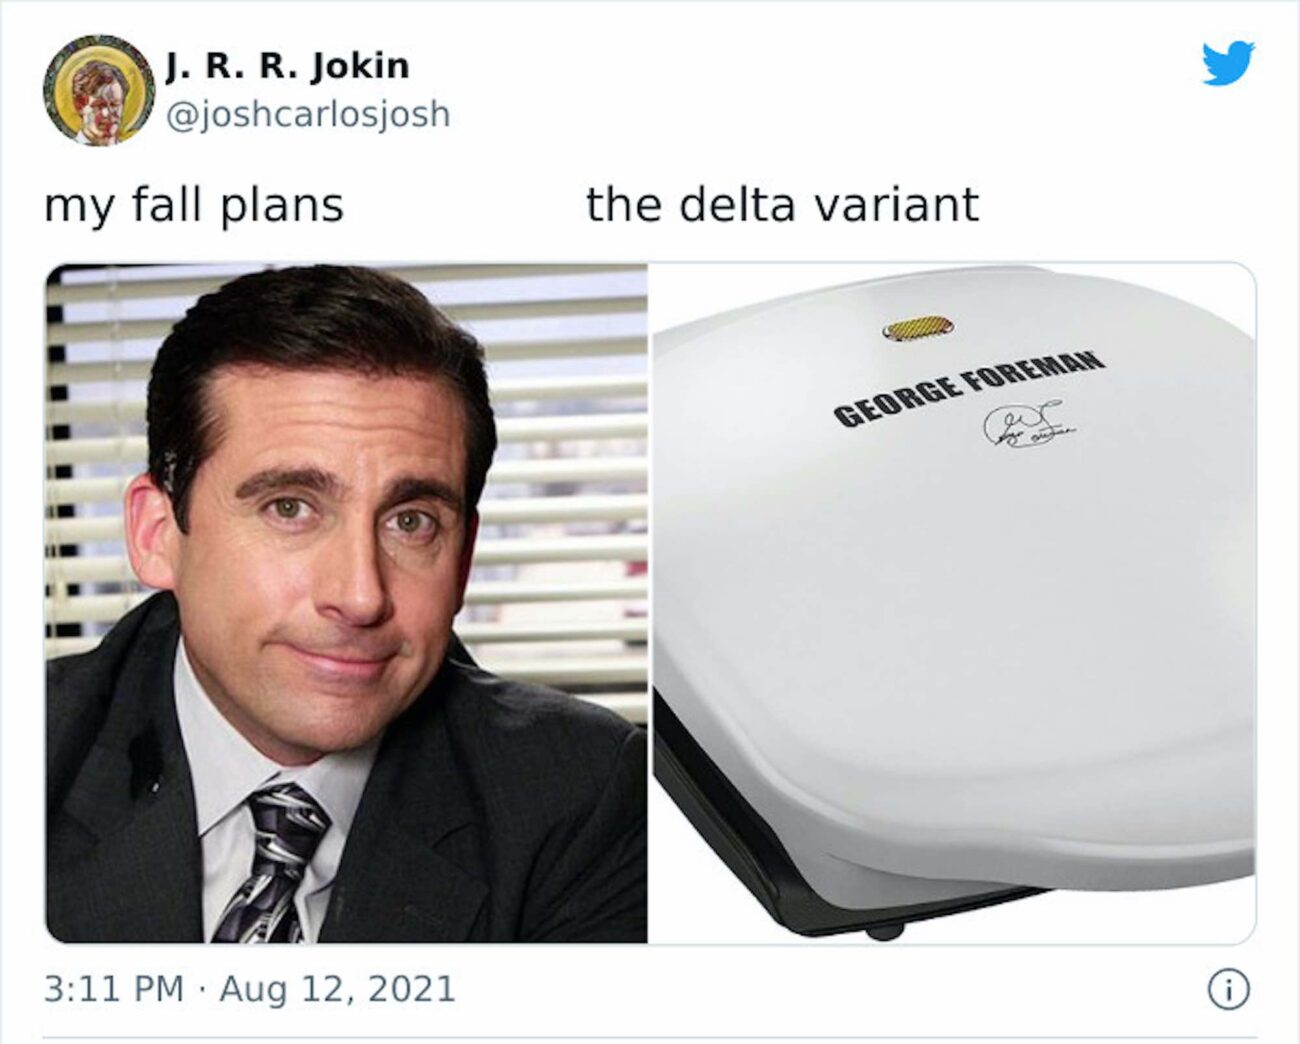 Shock! Horror! Who will win in the Fall vs the Delta variant showdown? Go through these hilarious memes to see who people think the winner is.